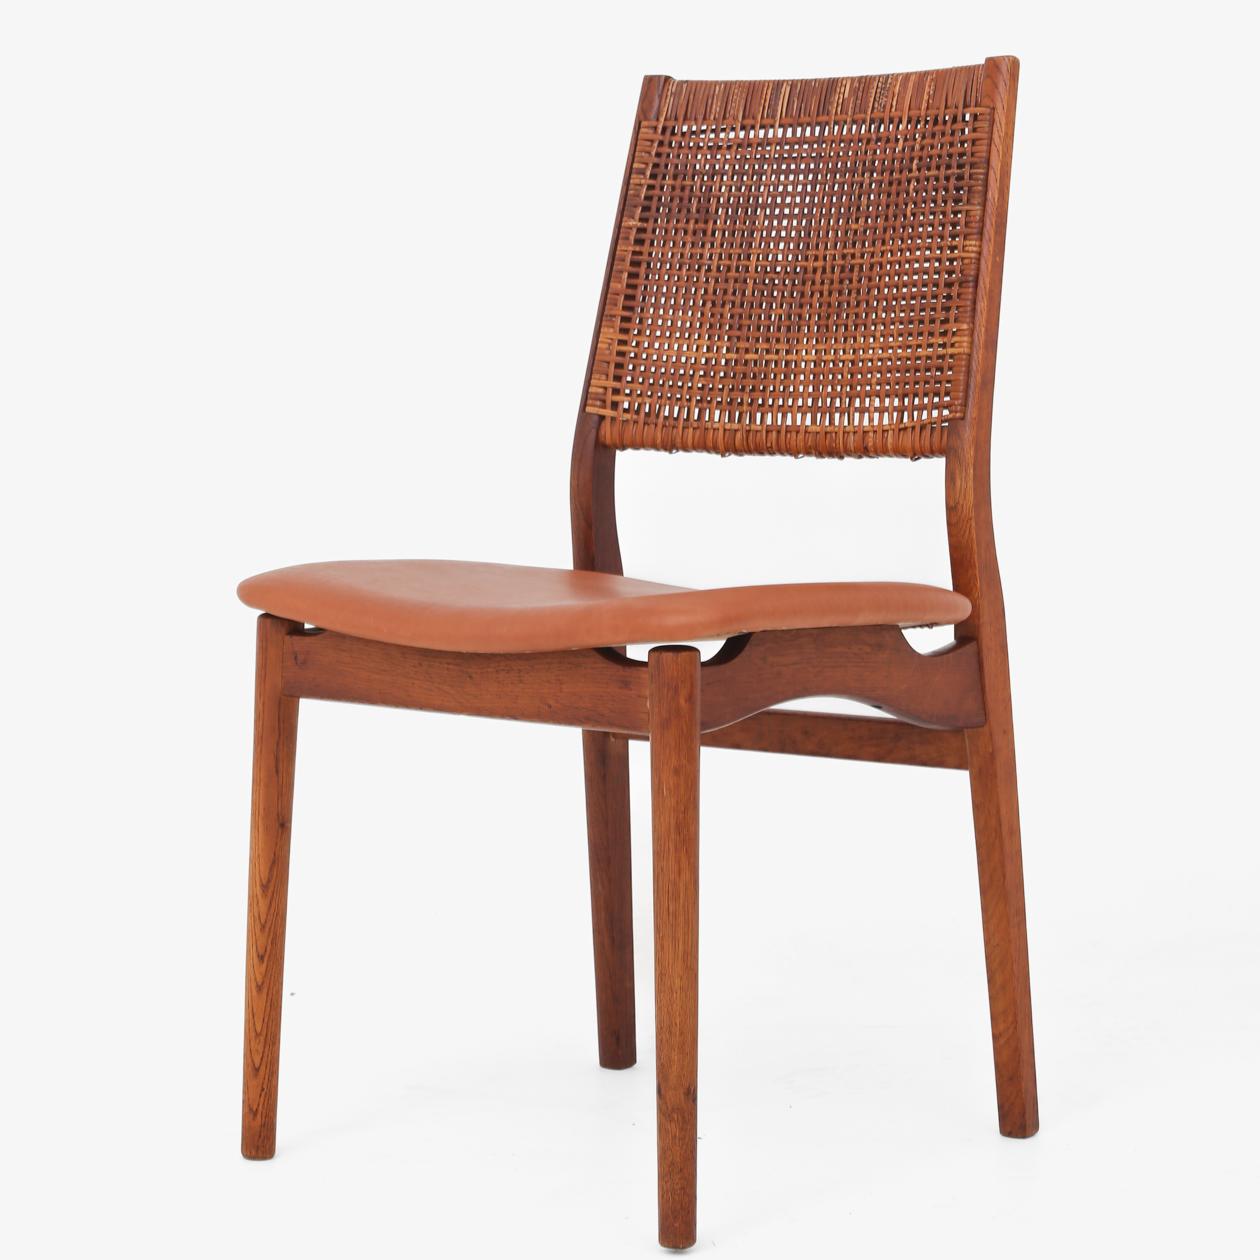 Set of four chairs in oak, cane and cognac leather. Helge Sibast